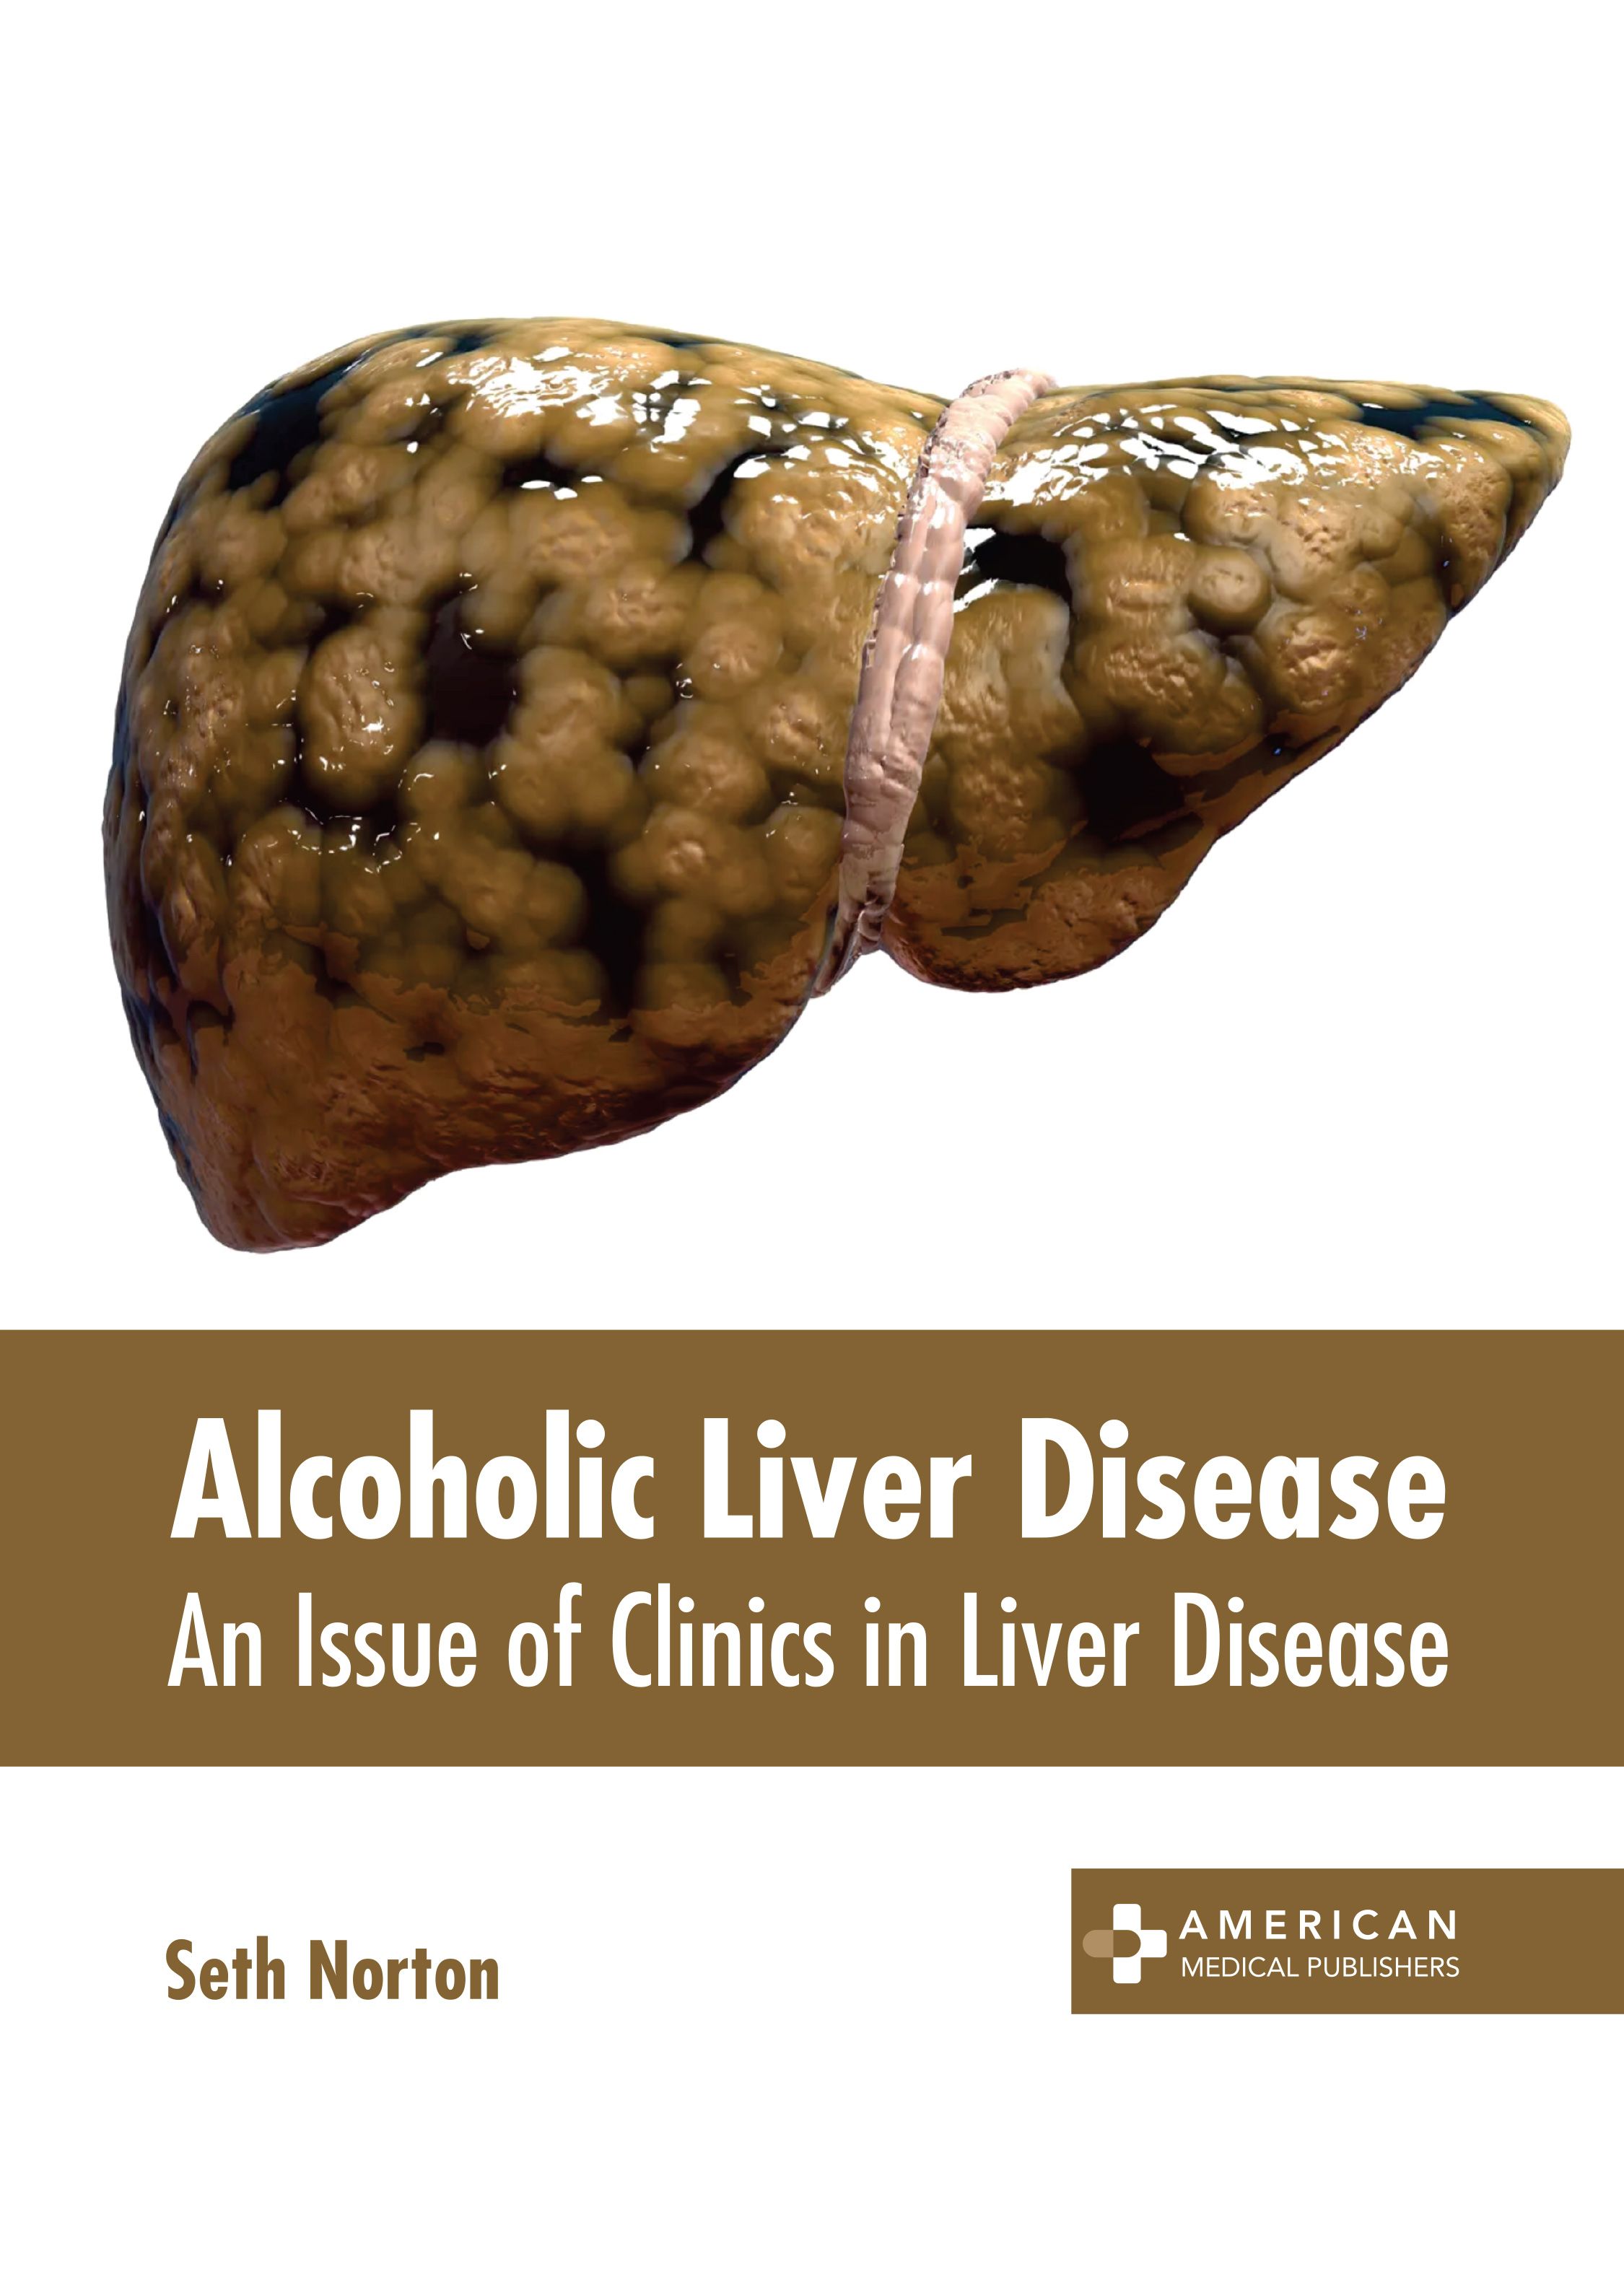 

exclusive-publishers/american-medical-publishers/alcoholic-liver-disease-an-issue-of-clinics-in-liver-disease-9781639278640